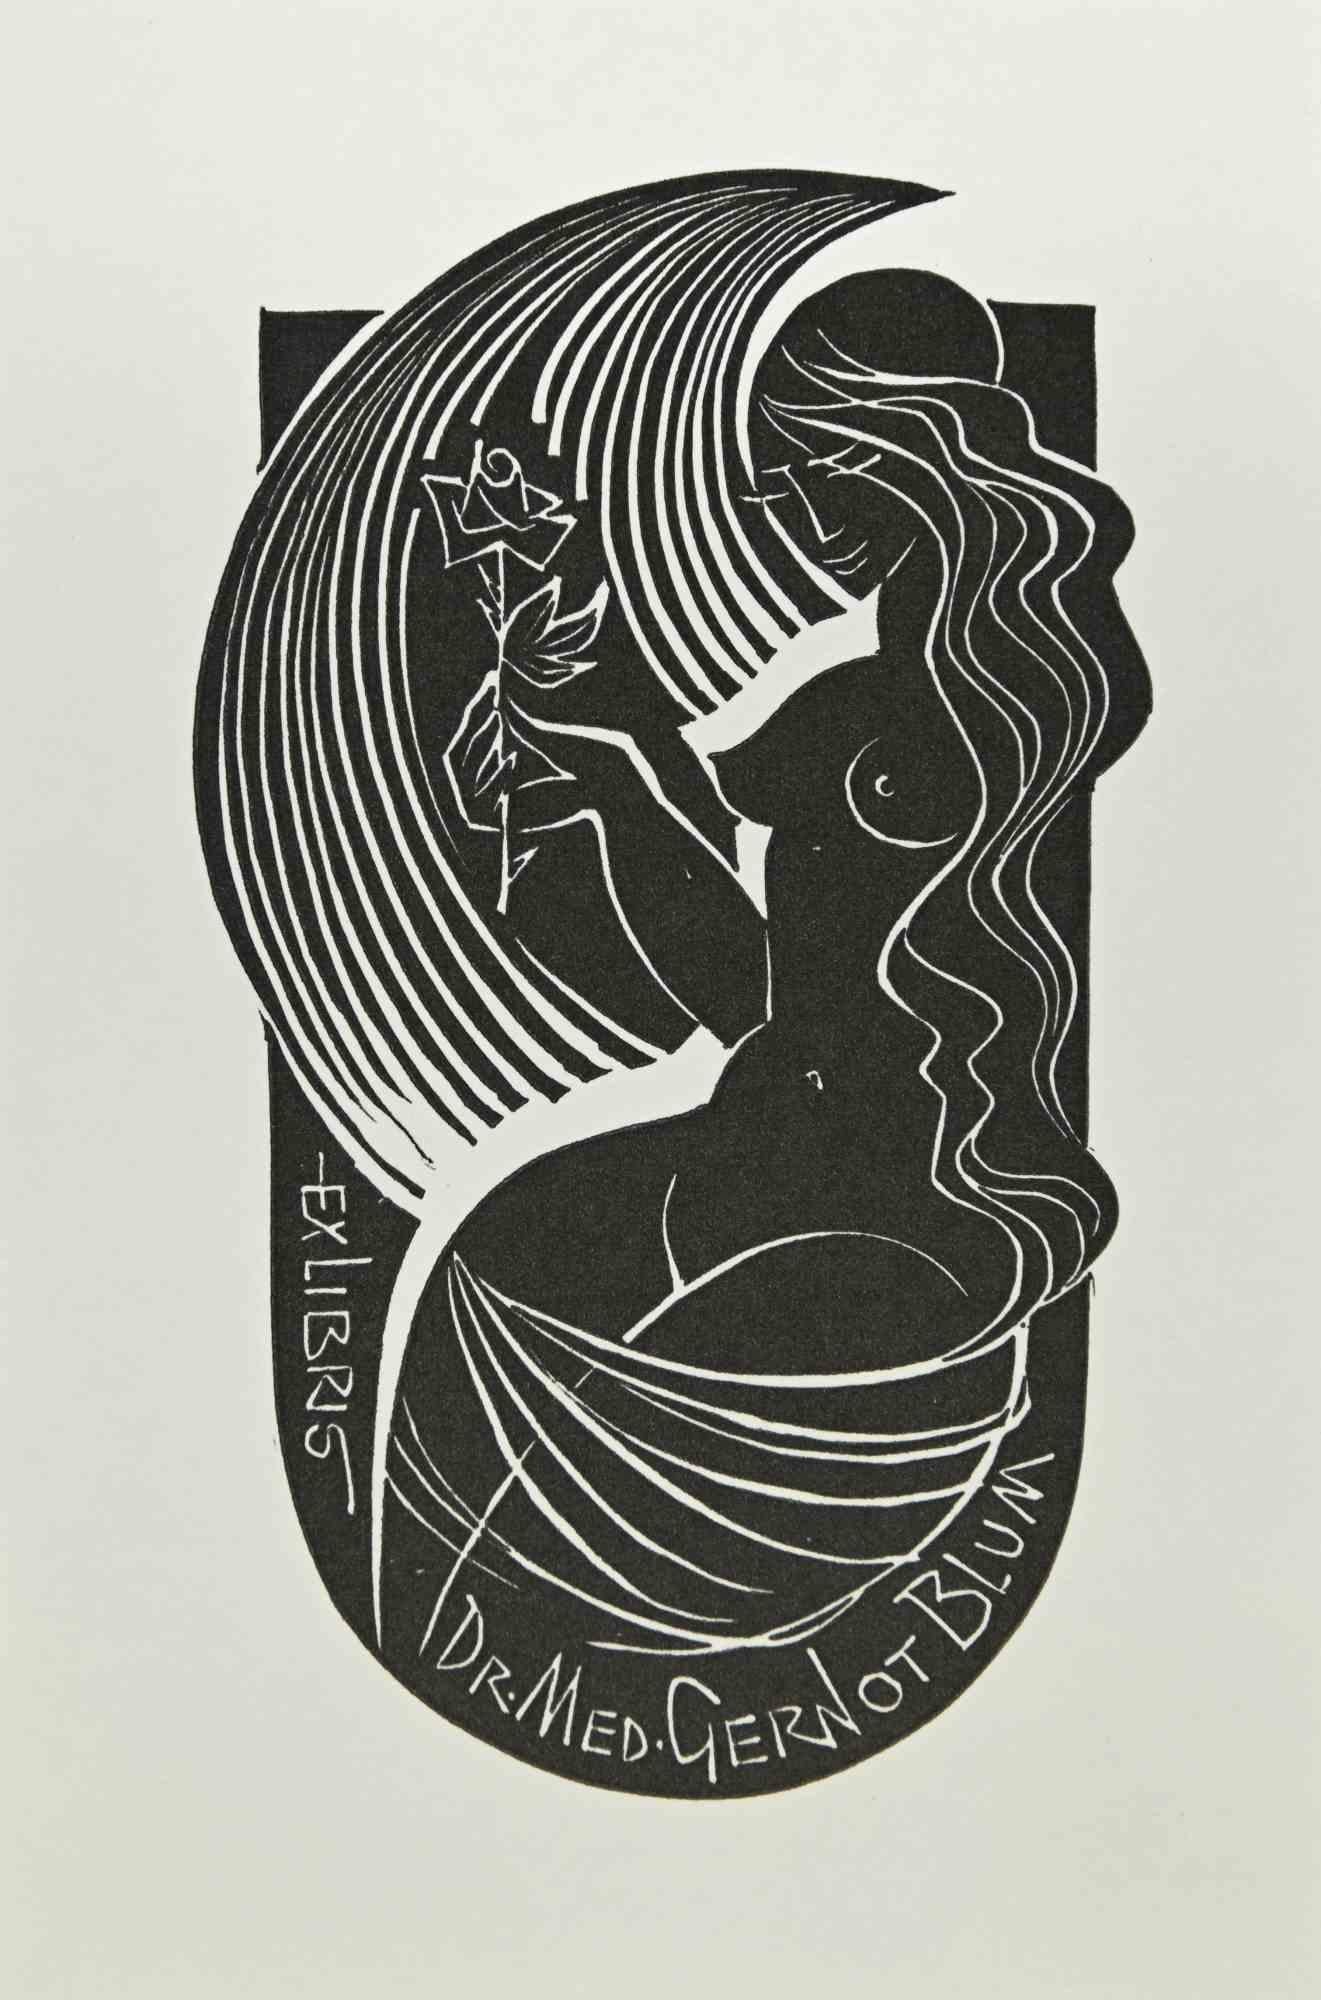 Ex Libris - Dr. Med. Gernot Blum is an Artwork realized in 1980 by the Czech Artist Ladislav Rusek (1927-2012)

Woodcut print on paper.

Good conditions.

The artist wants to define a well-balanced composition, through preciseness and congruous